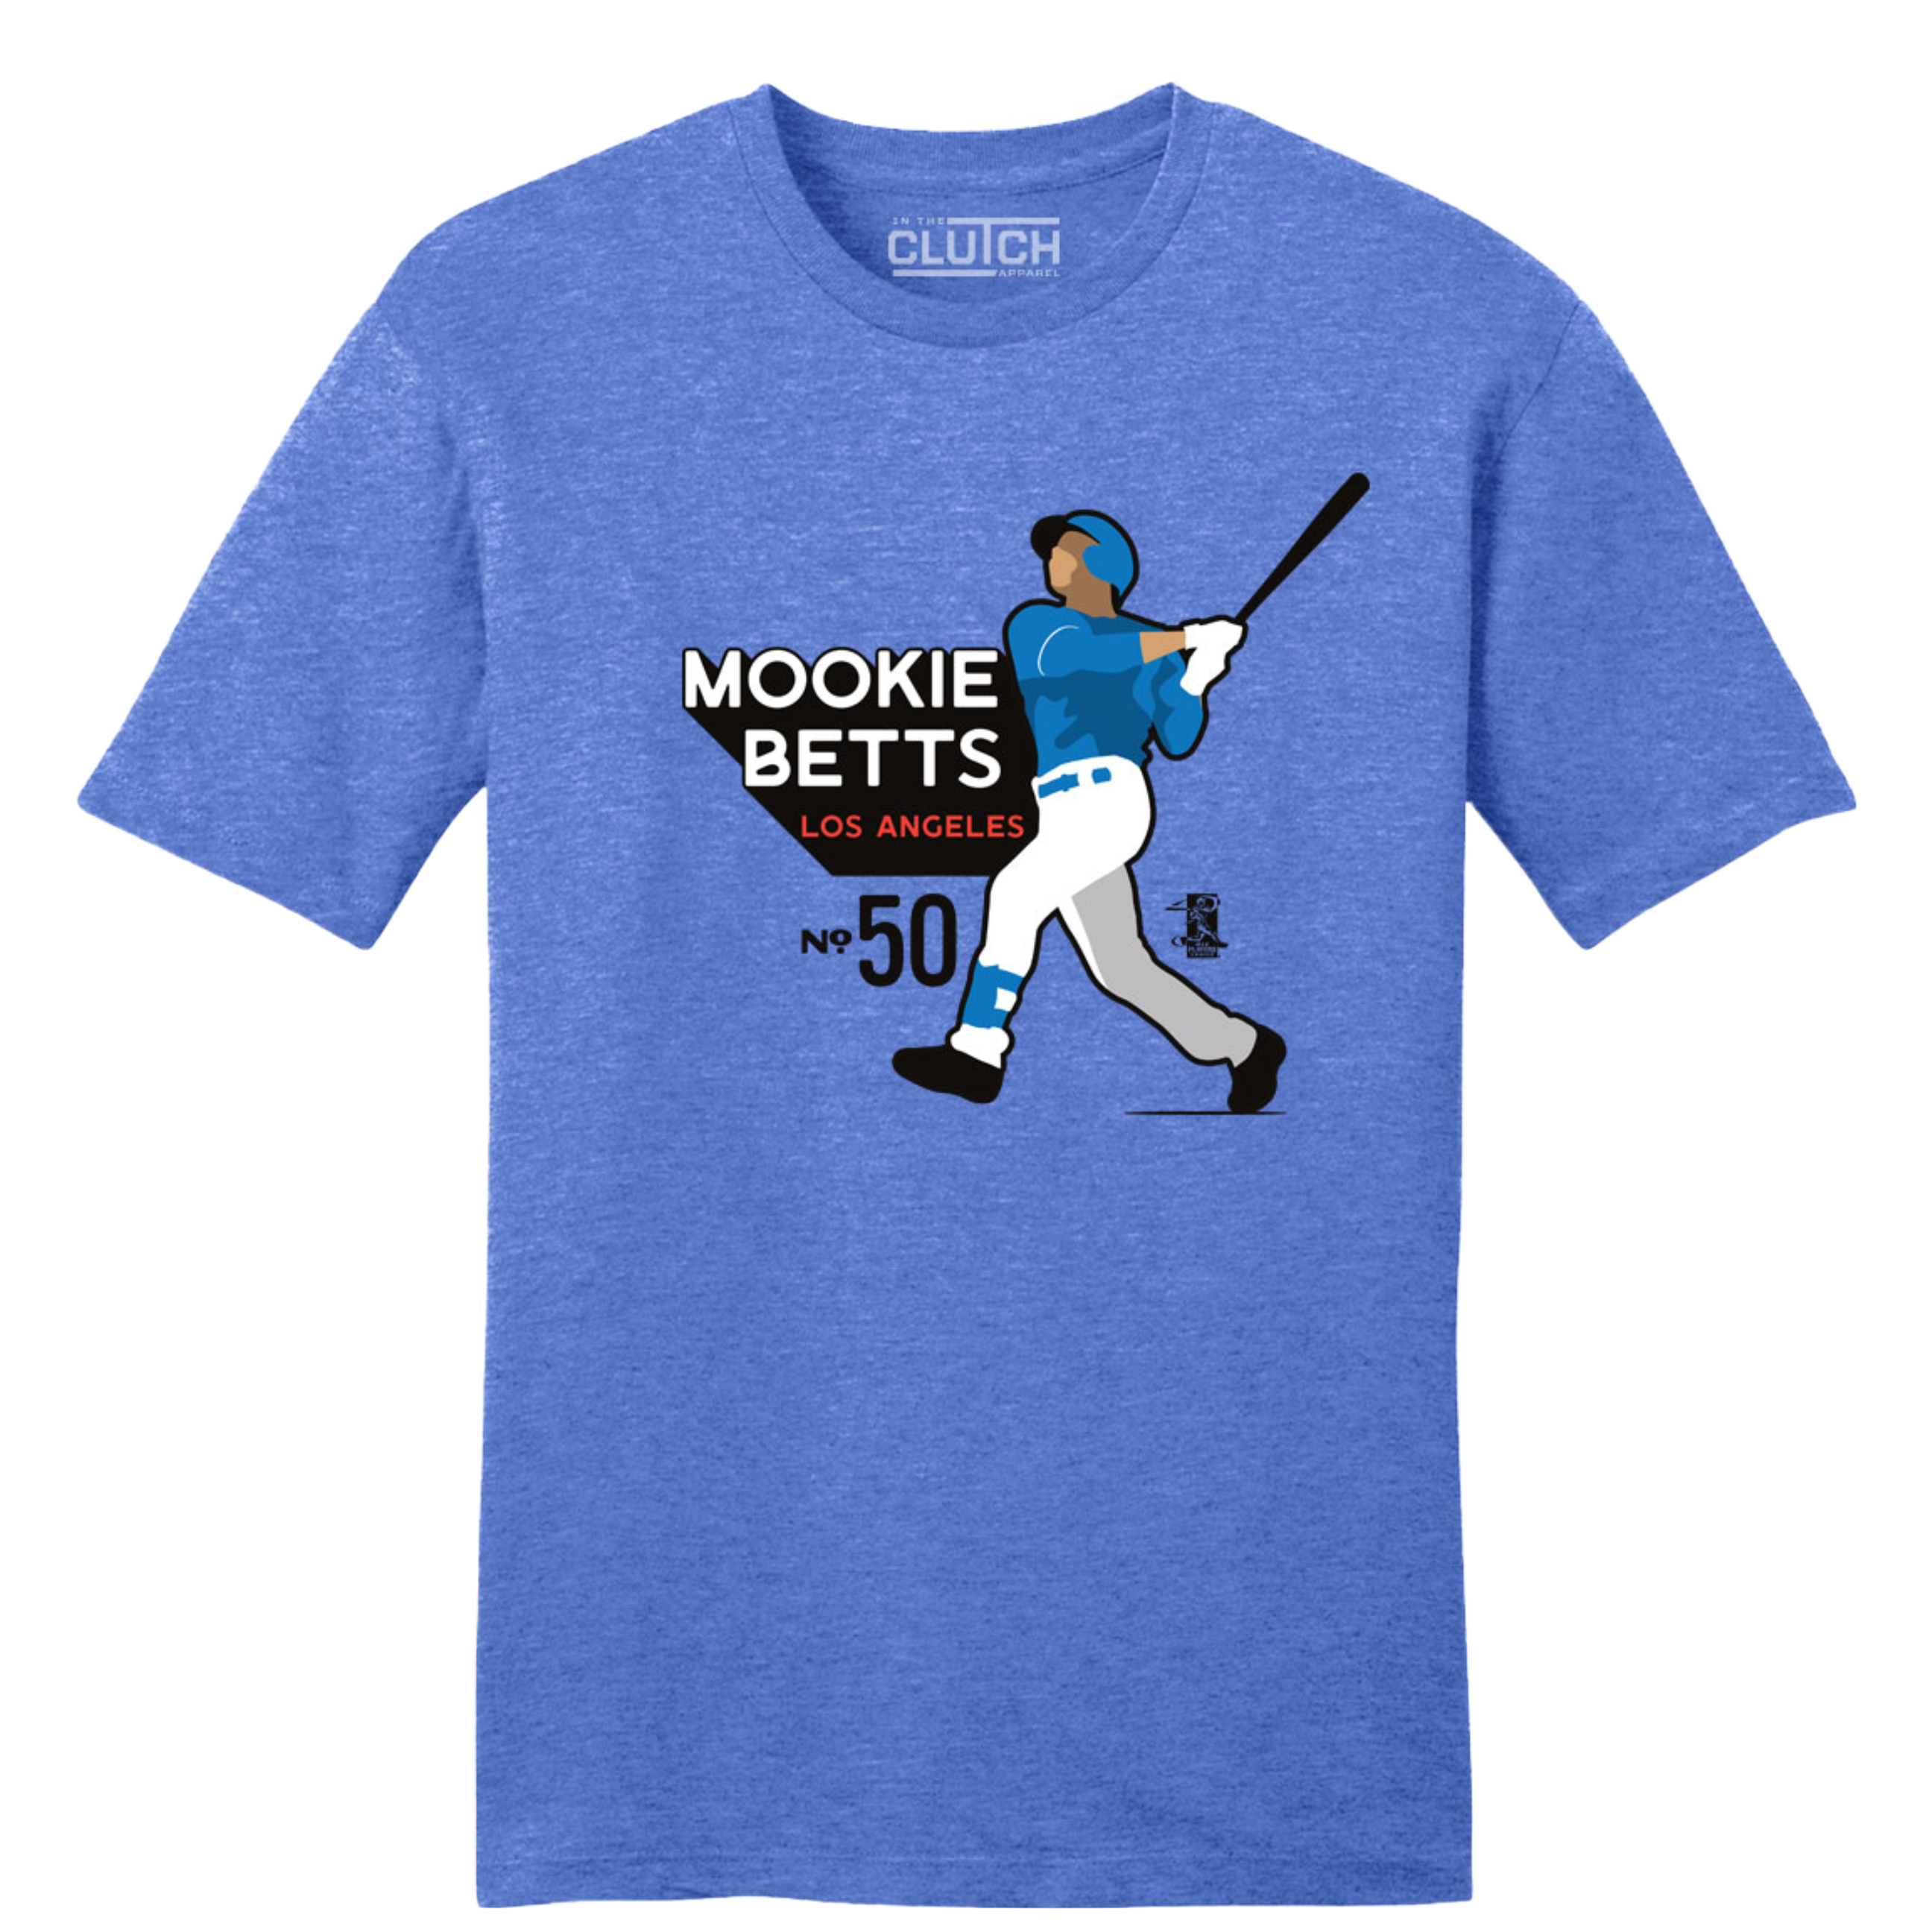 Official Mookie Betts PMLBPA Gem Mint Tee, Gem Mint Collection